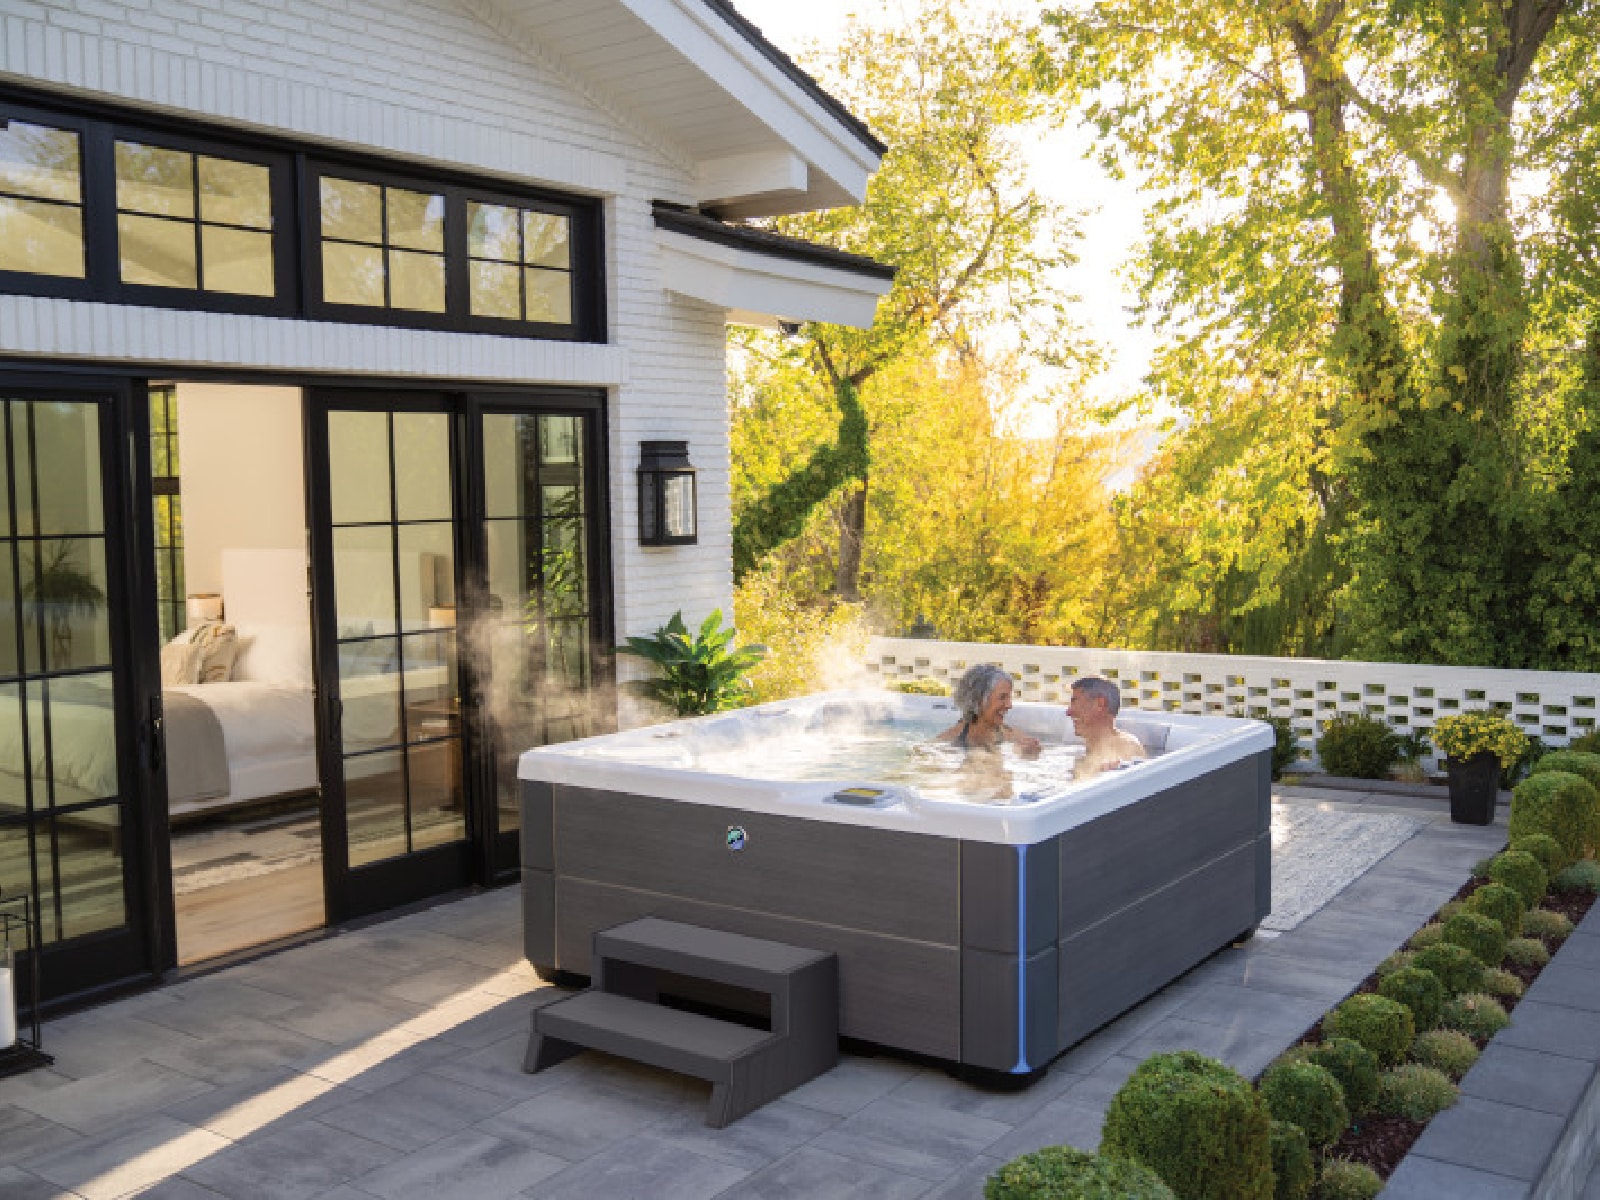 How Much Energy Do Hot Spring Hot Tubs Use? – Texas Hot Tub Company